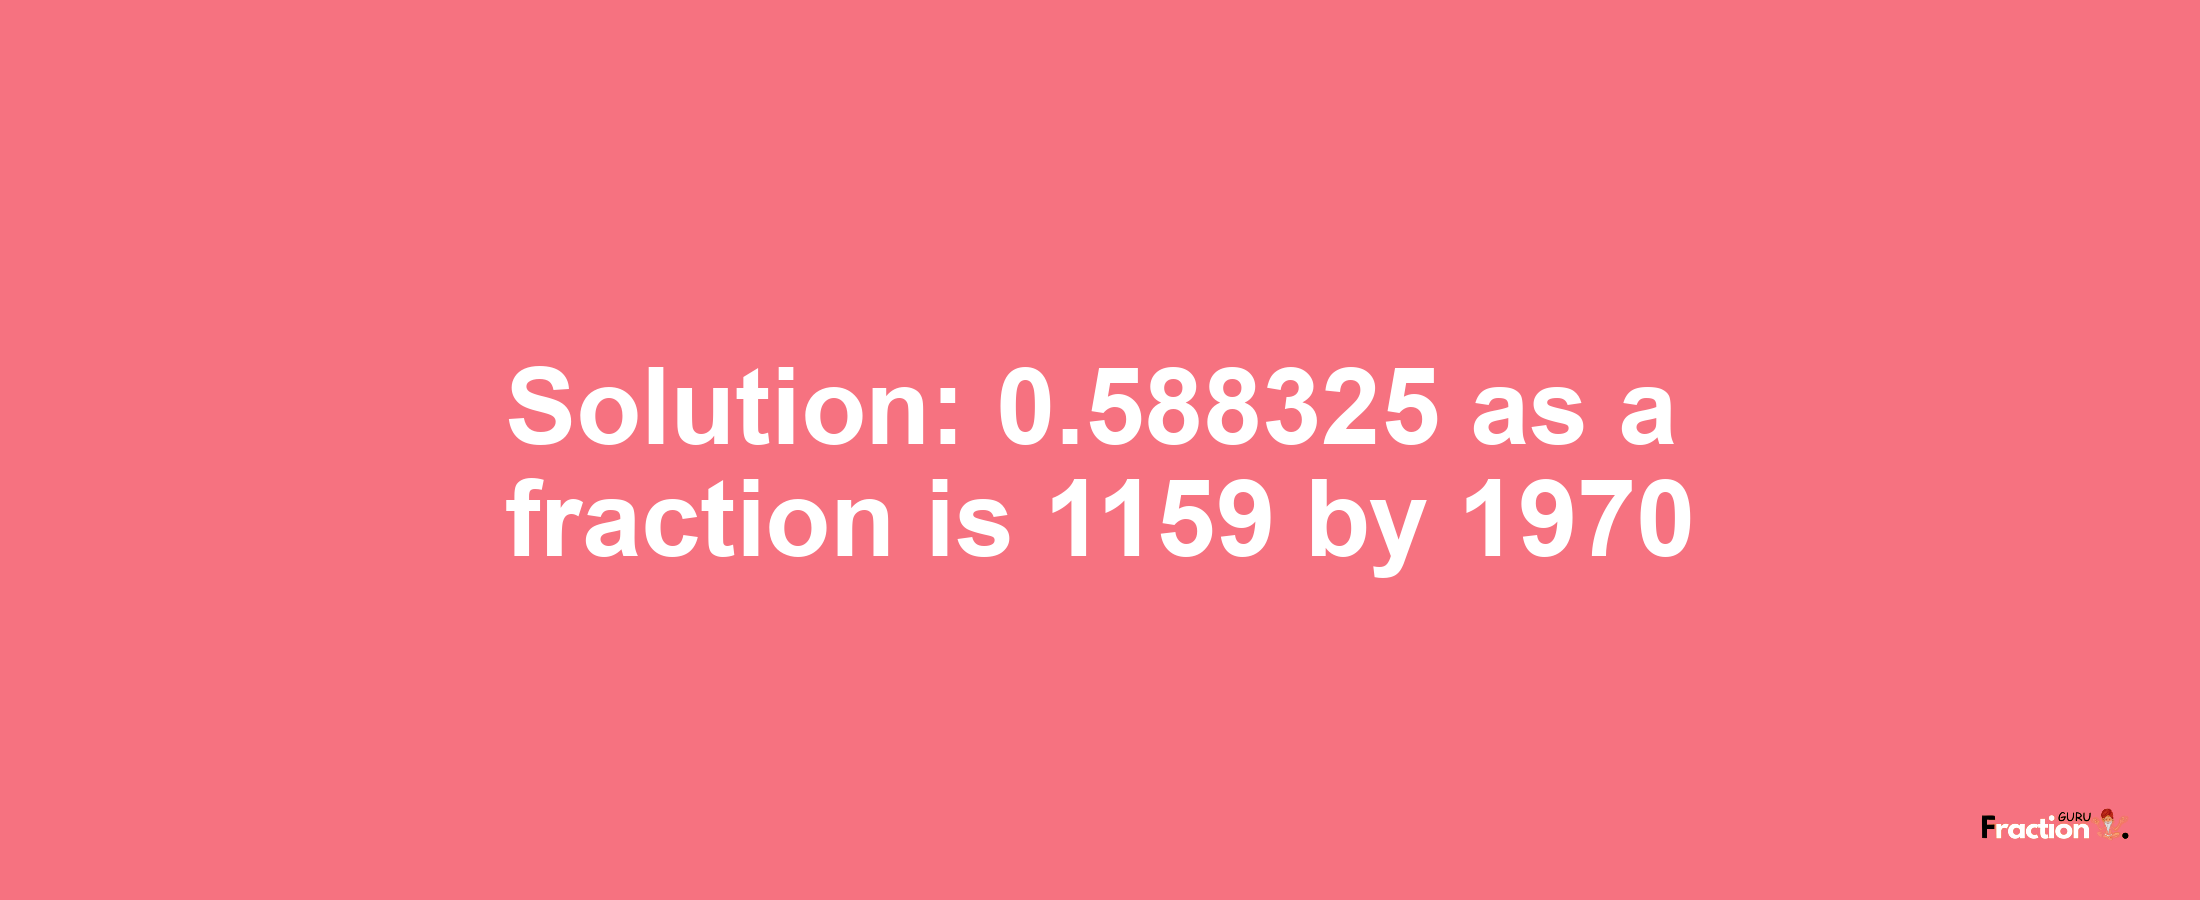 Solution:0.588325 as a fraction is 1159/1970